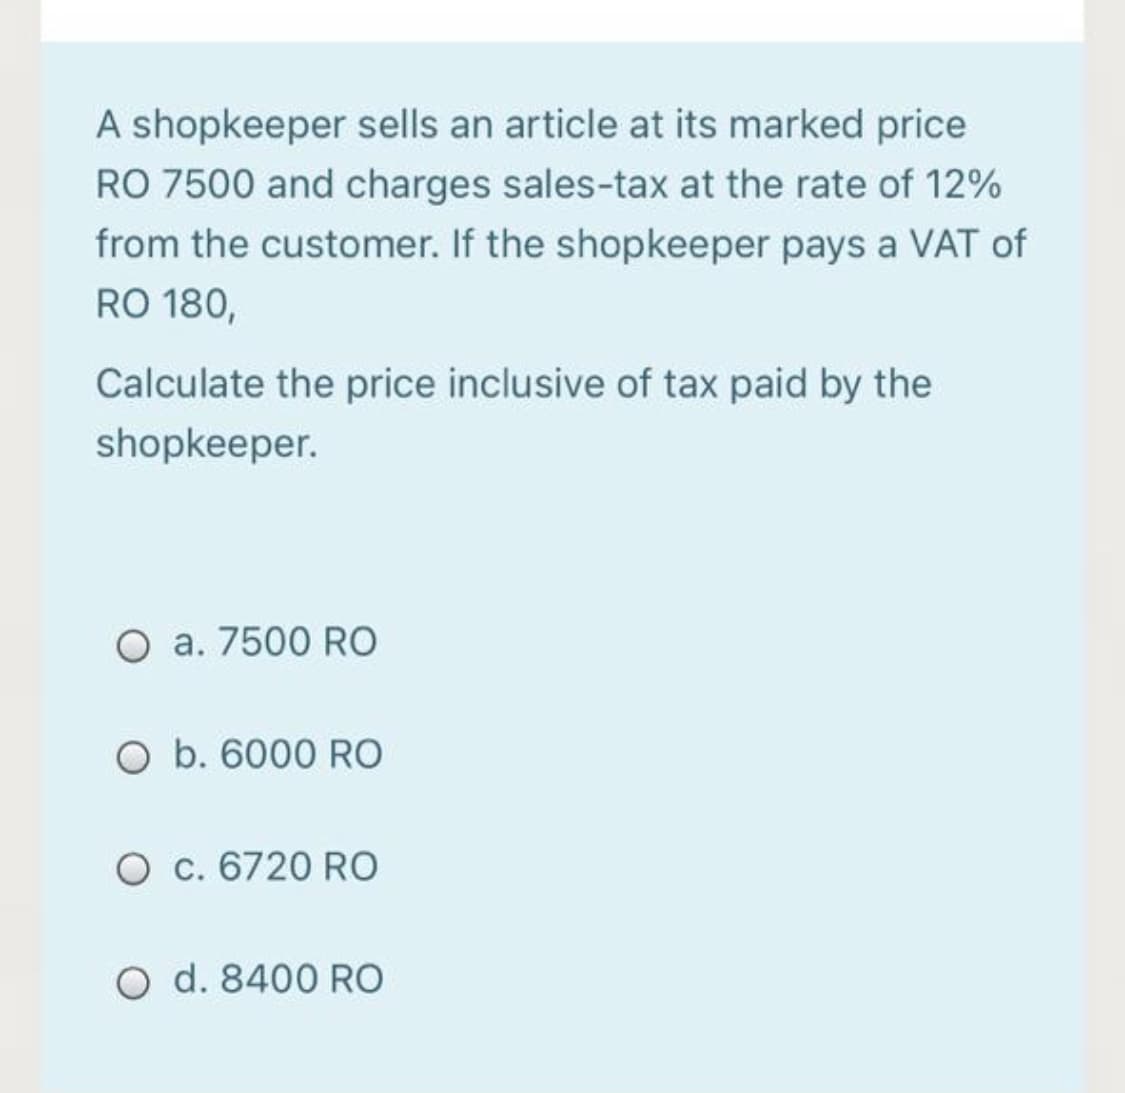 A shopkeeper sells an article at its marked price
RO 7500 and charges sales-tax at the rate of 12%
from the customer. If the shopkeeper pays a VAT of
RO 180,
Calculate the price inclusive of tax paid by the
shopkeeper.
O a. 7500 RO
O b. 6000 RO
O c. 6720 RO
O d. 8400 RO
